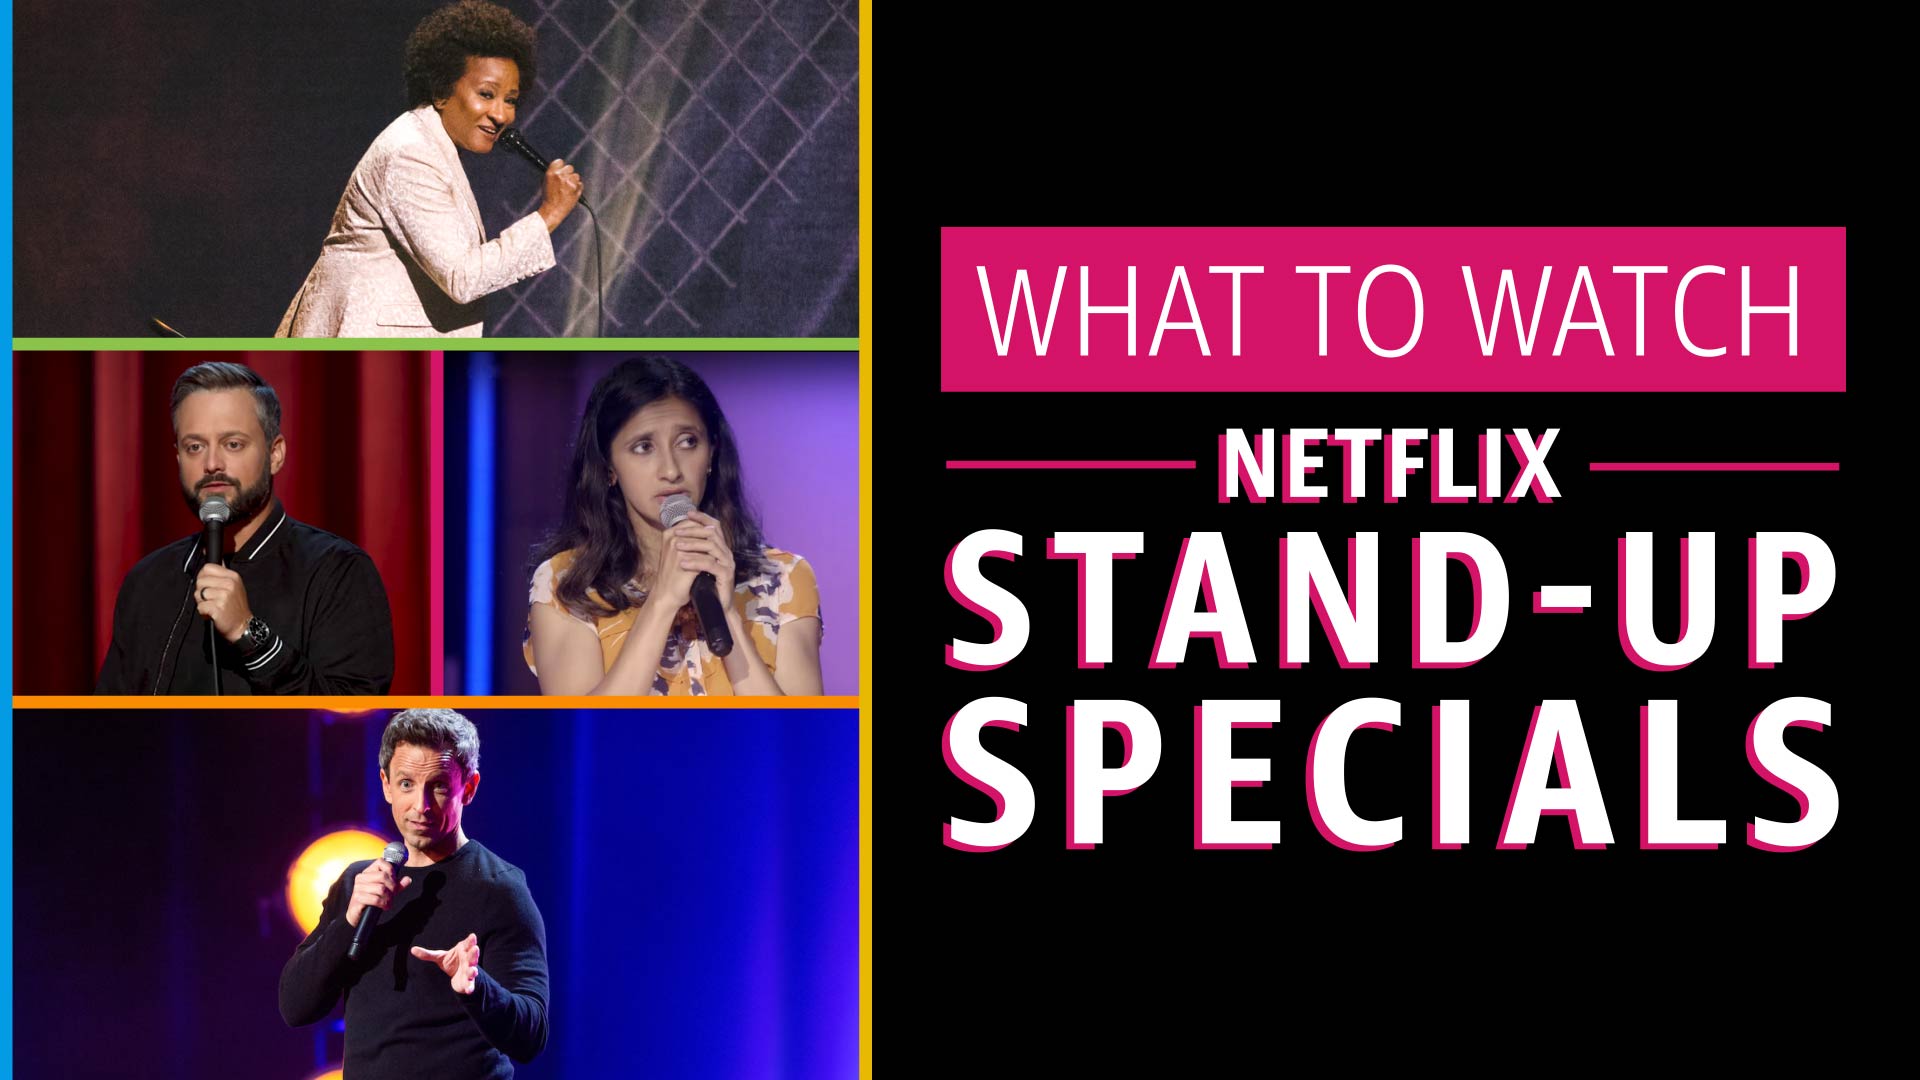 Wanda Sykes and Seth Meyers in What to Watch: Netflix Stand-Up Specials (2020)